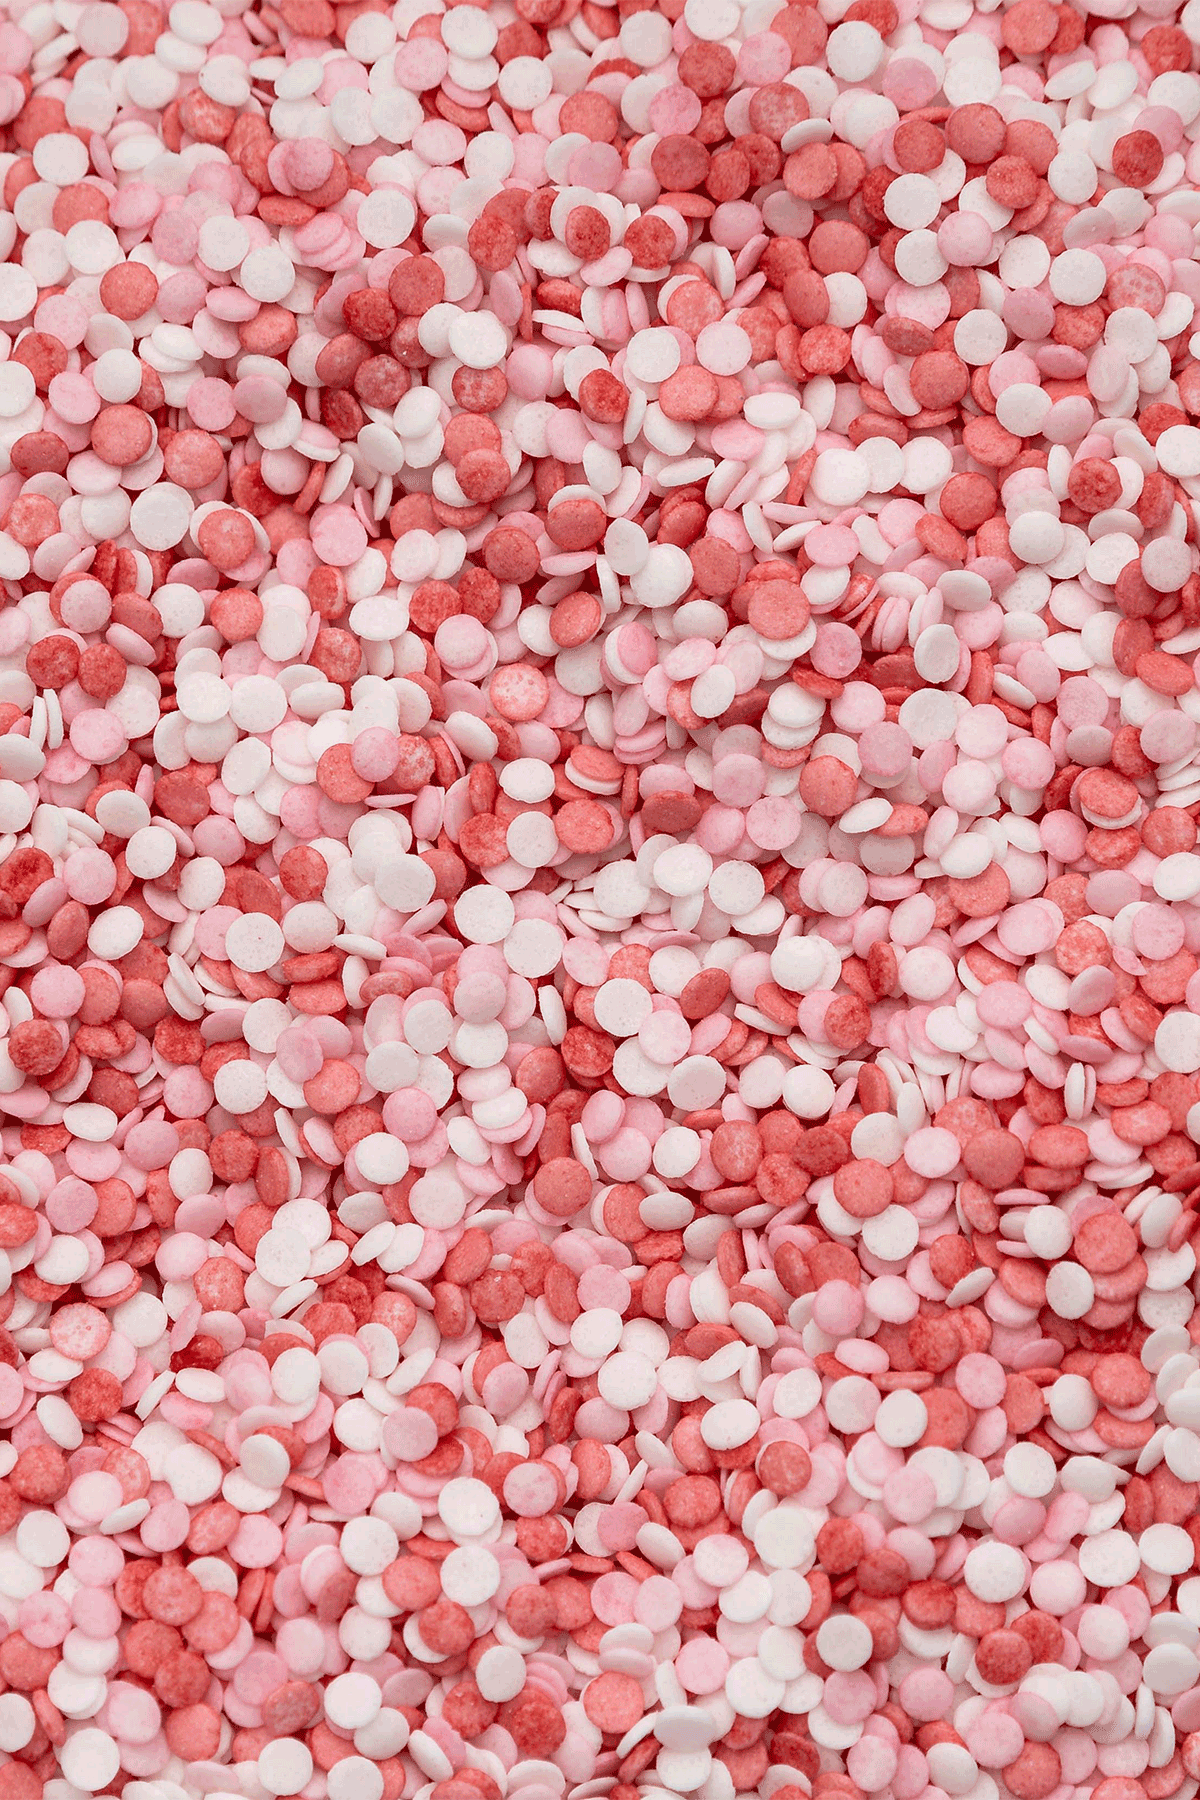 Natural Confetti - Pink, White & Red (Valentines Mix) Sprinkles SPRINKLY 